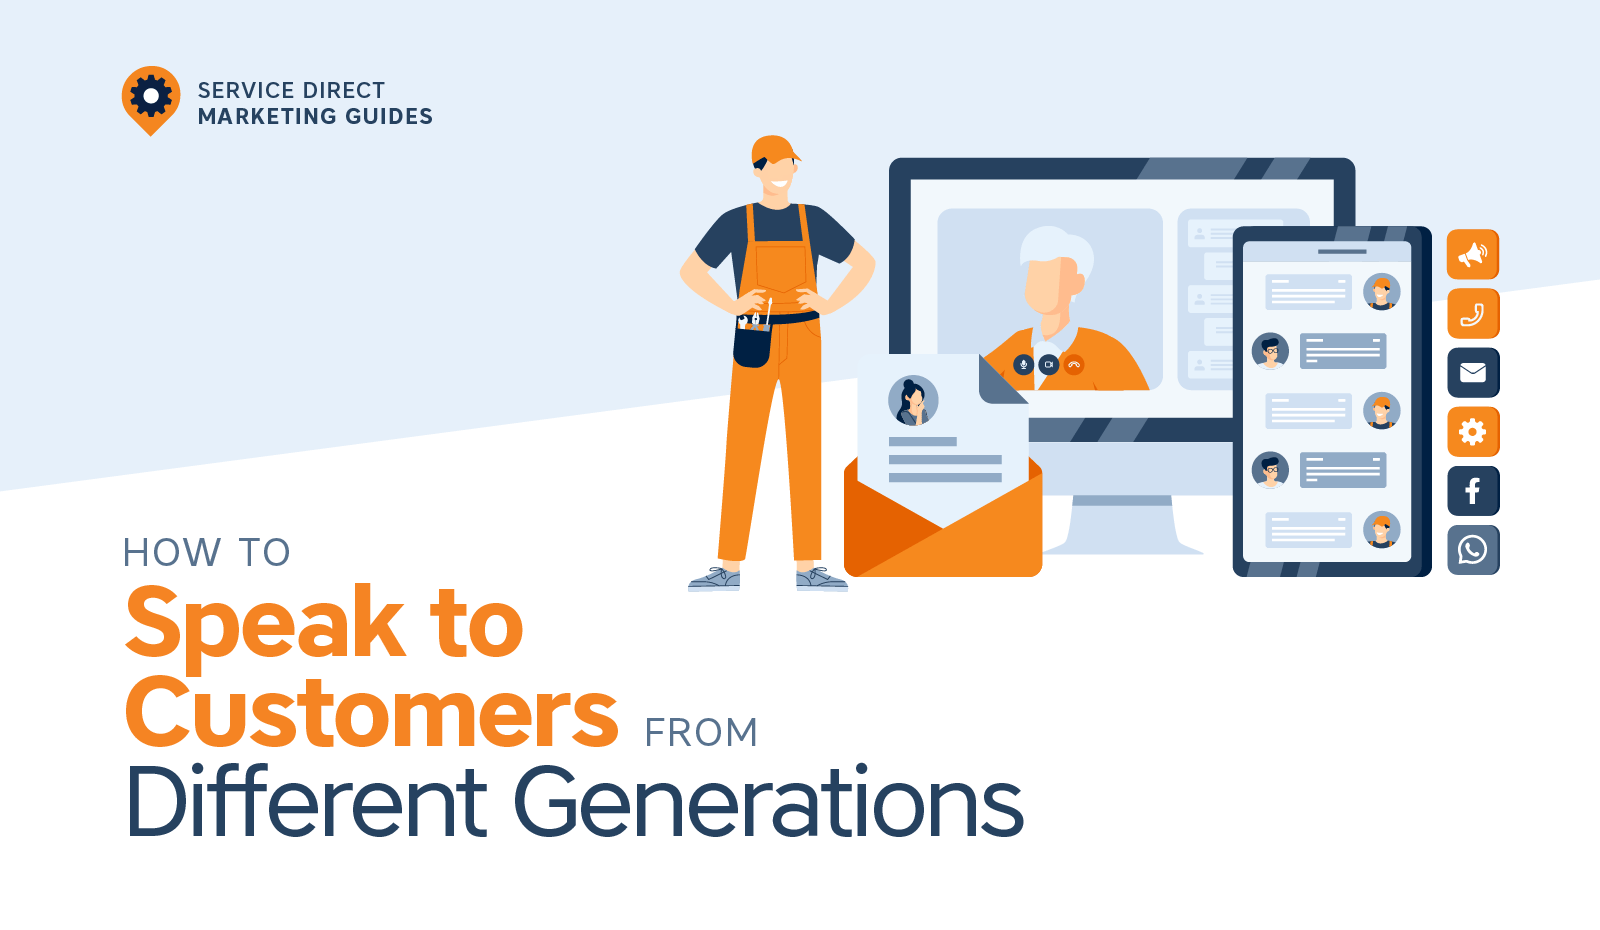 How to Speak to Customers from Different Generations